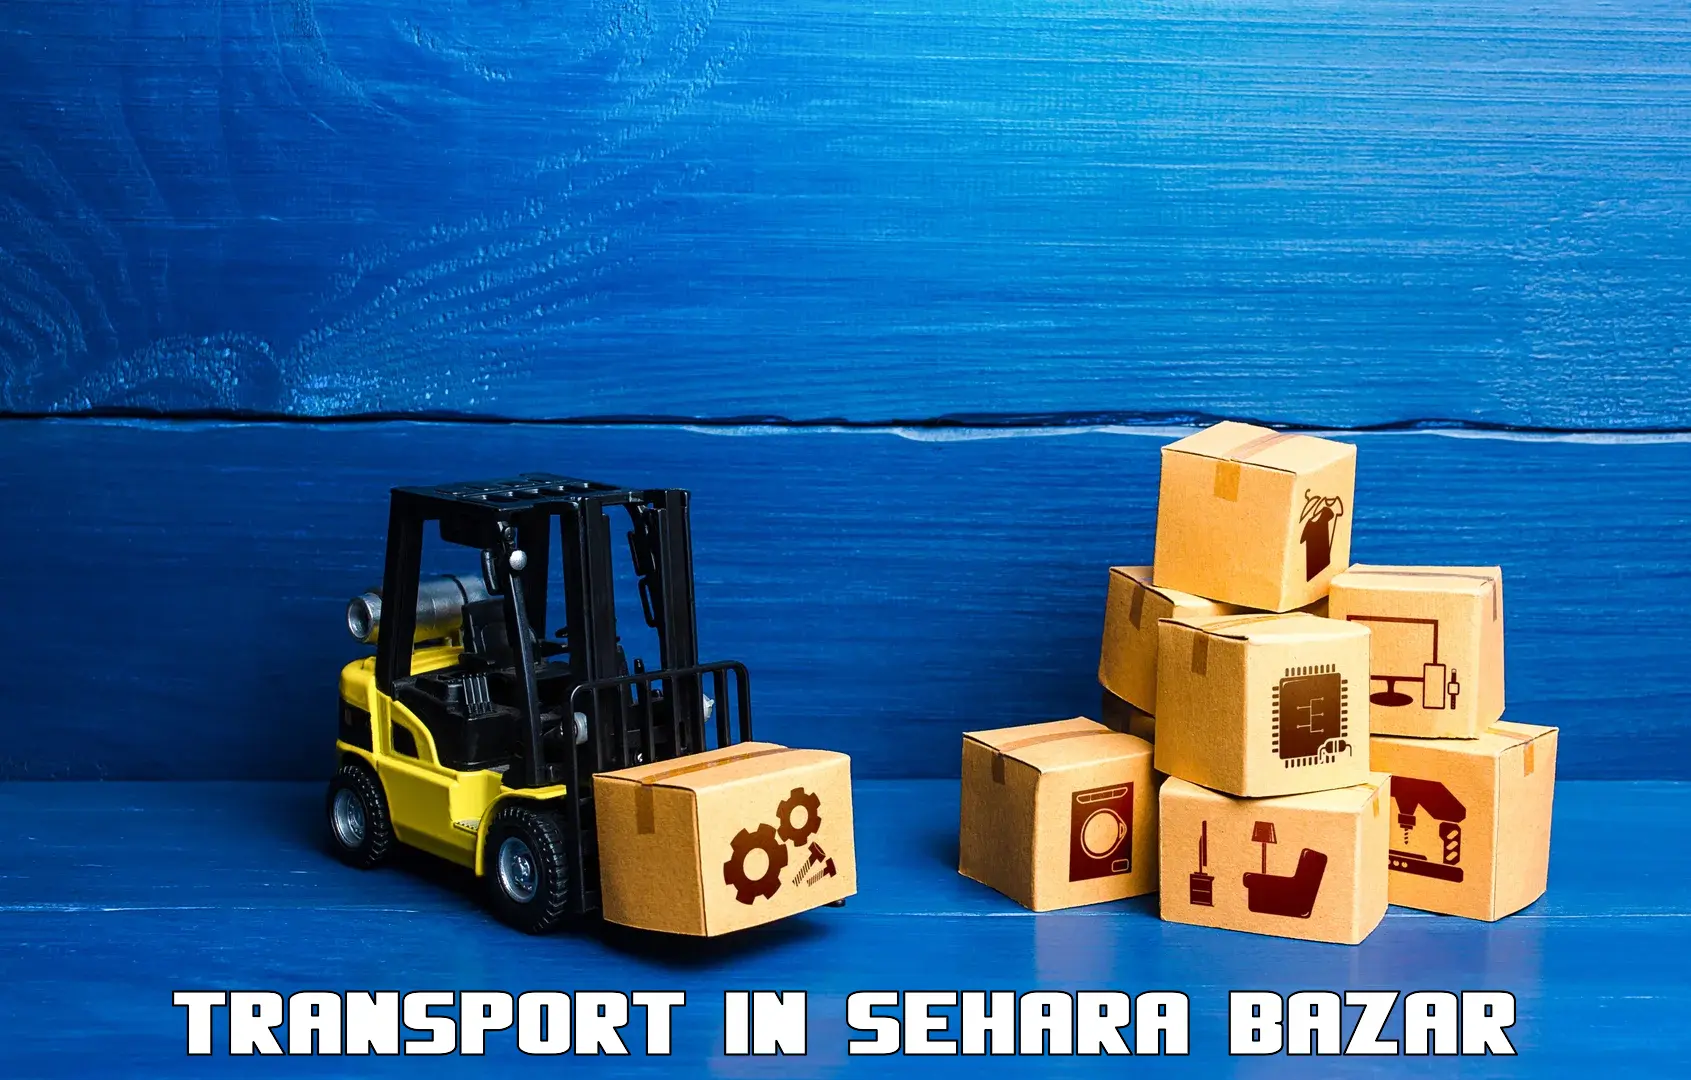 Container transportation services in Sehara Bazar